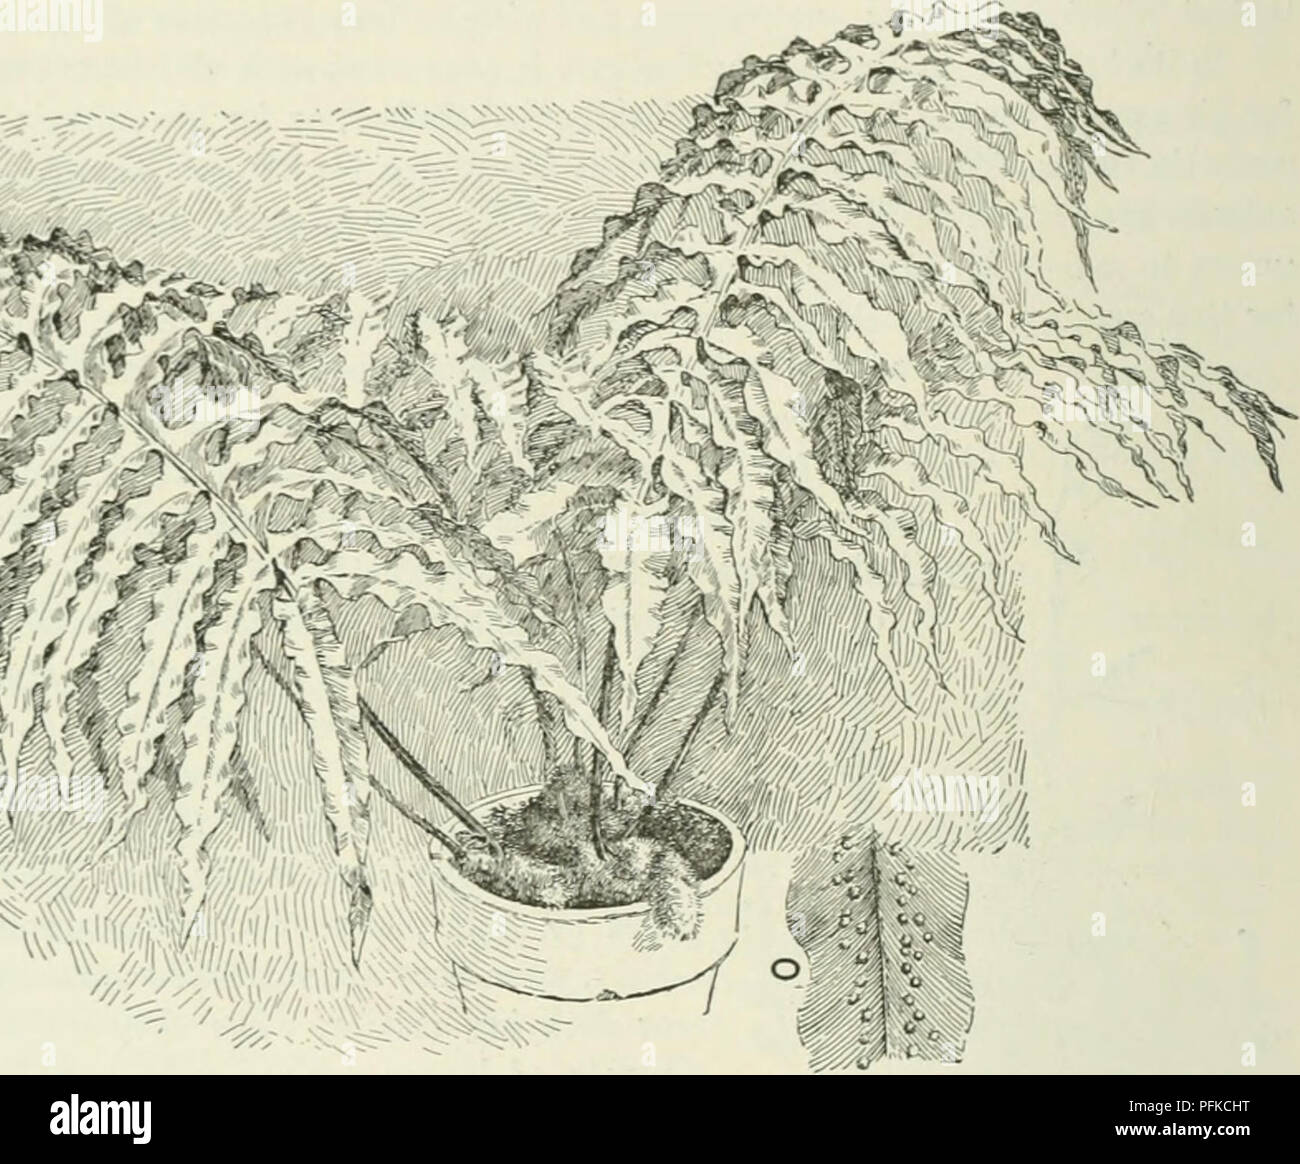 . Cyclopedia of farm crops : a popular survey of crops and crop-making methods in the United States and Canada. Agriculture -- Canada; Agriculture -- United States; Farm produce -- Canada; Farm produce -- United States. Fig. 2. A fern, one of the vascular (( vessel-bearing) flowerless plants. The fruit-bodies, bearing spores, are shown on the back of a leaf at O. The custom has arisen of designating the kinds or species of plants by Latin-form names in two parts,— the first part or word standing for the genus or race-group, and the second part standing for the particular species or kind. Thus, Stock Photo